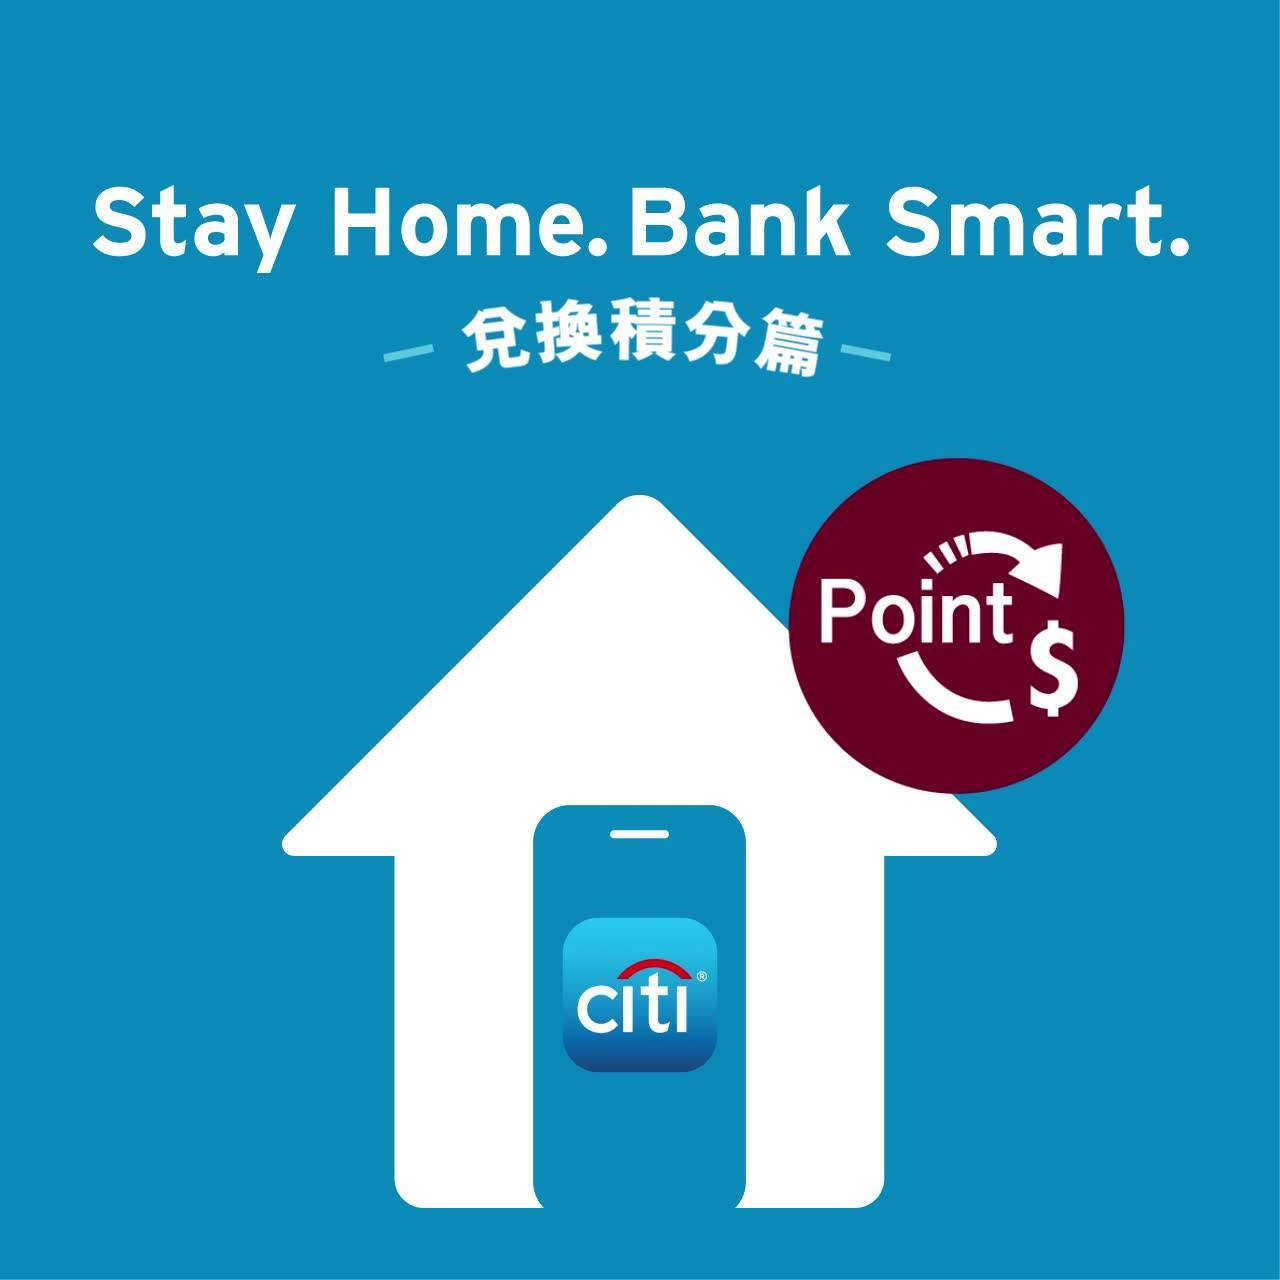 【”Stay Home. Bank Smart.” – 兌換積分篇】